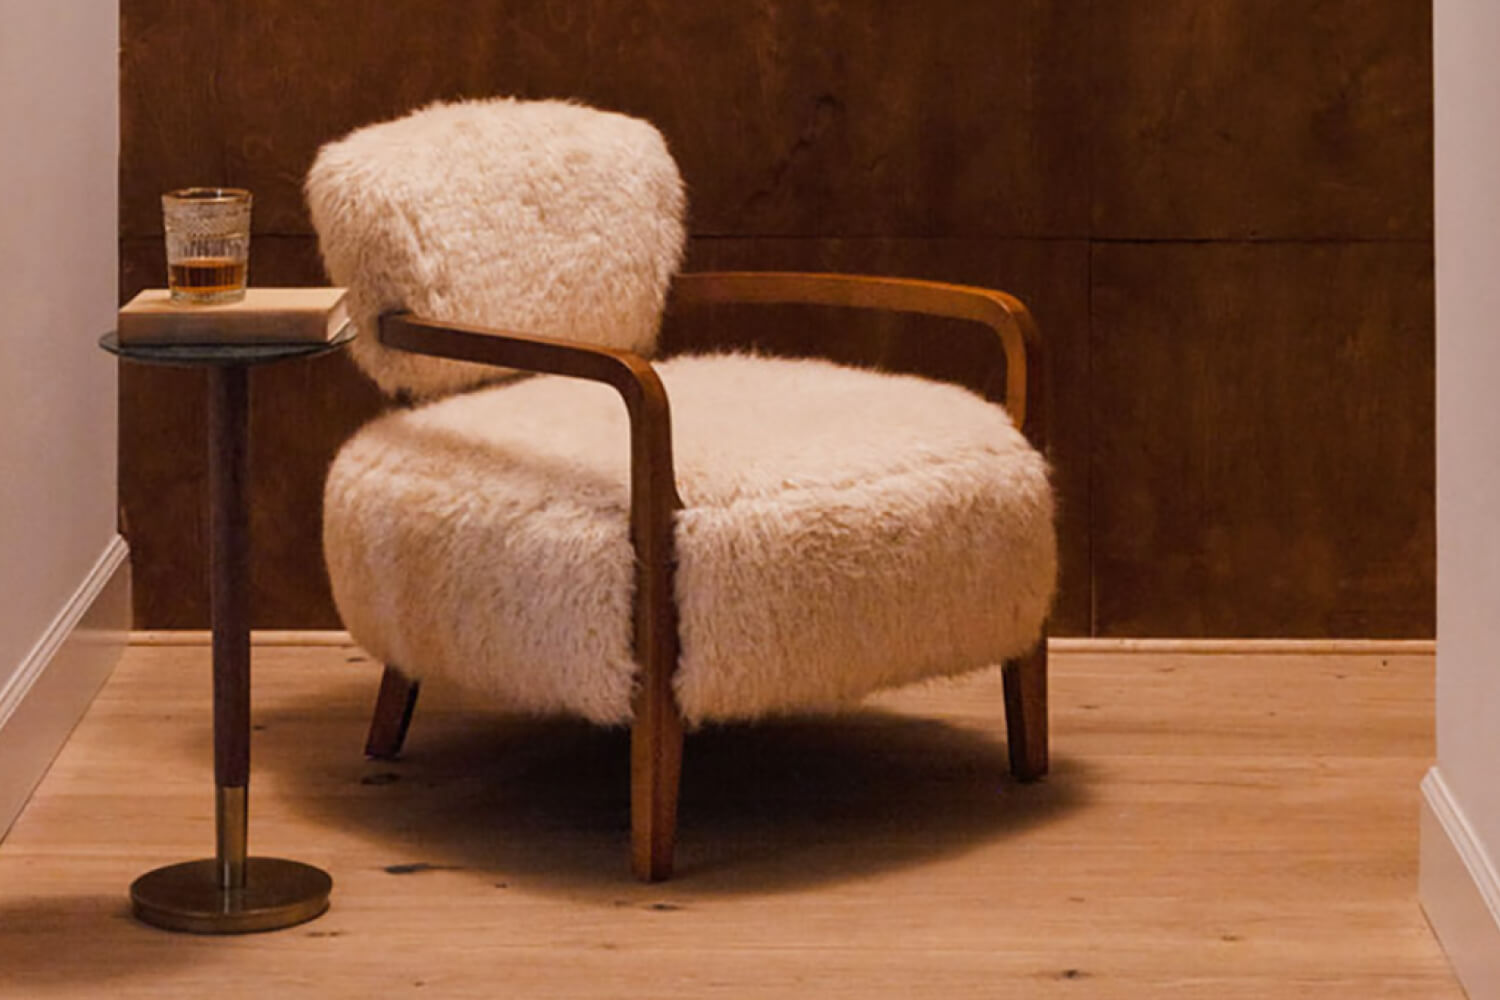 A cozy Yeti Sheepskin Armchair in a warm, well-lit room featuring fluffy upholstery for comfort and a small round side table holding a glass and a book.